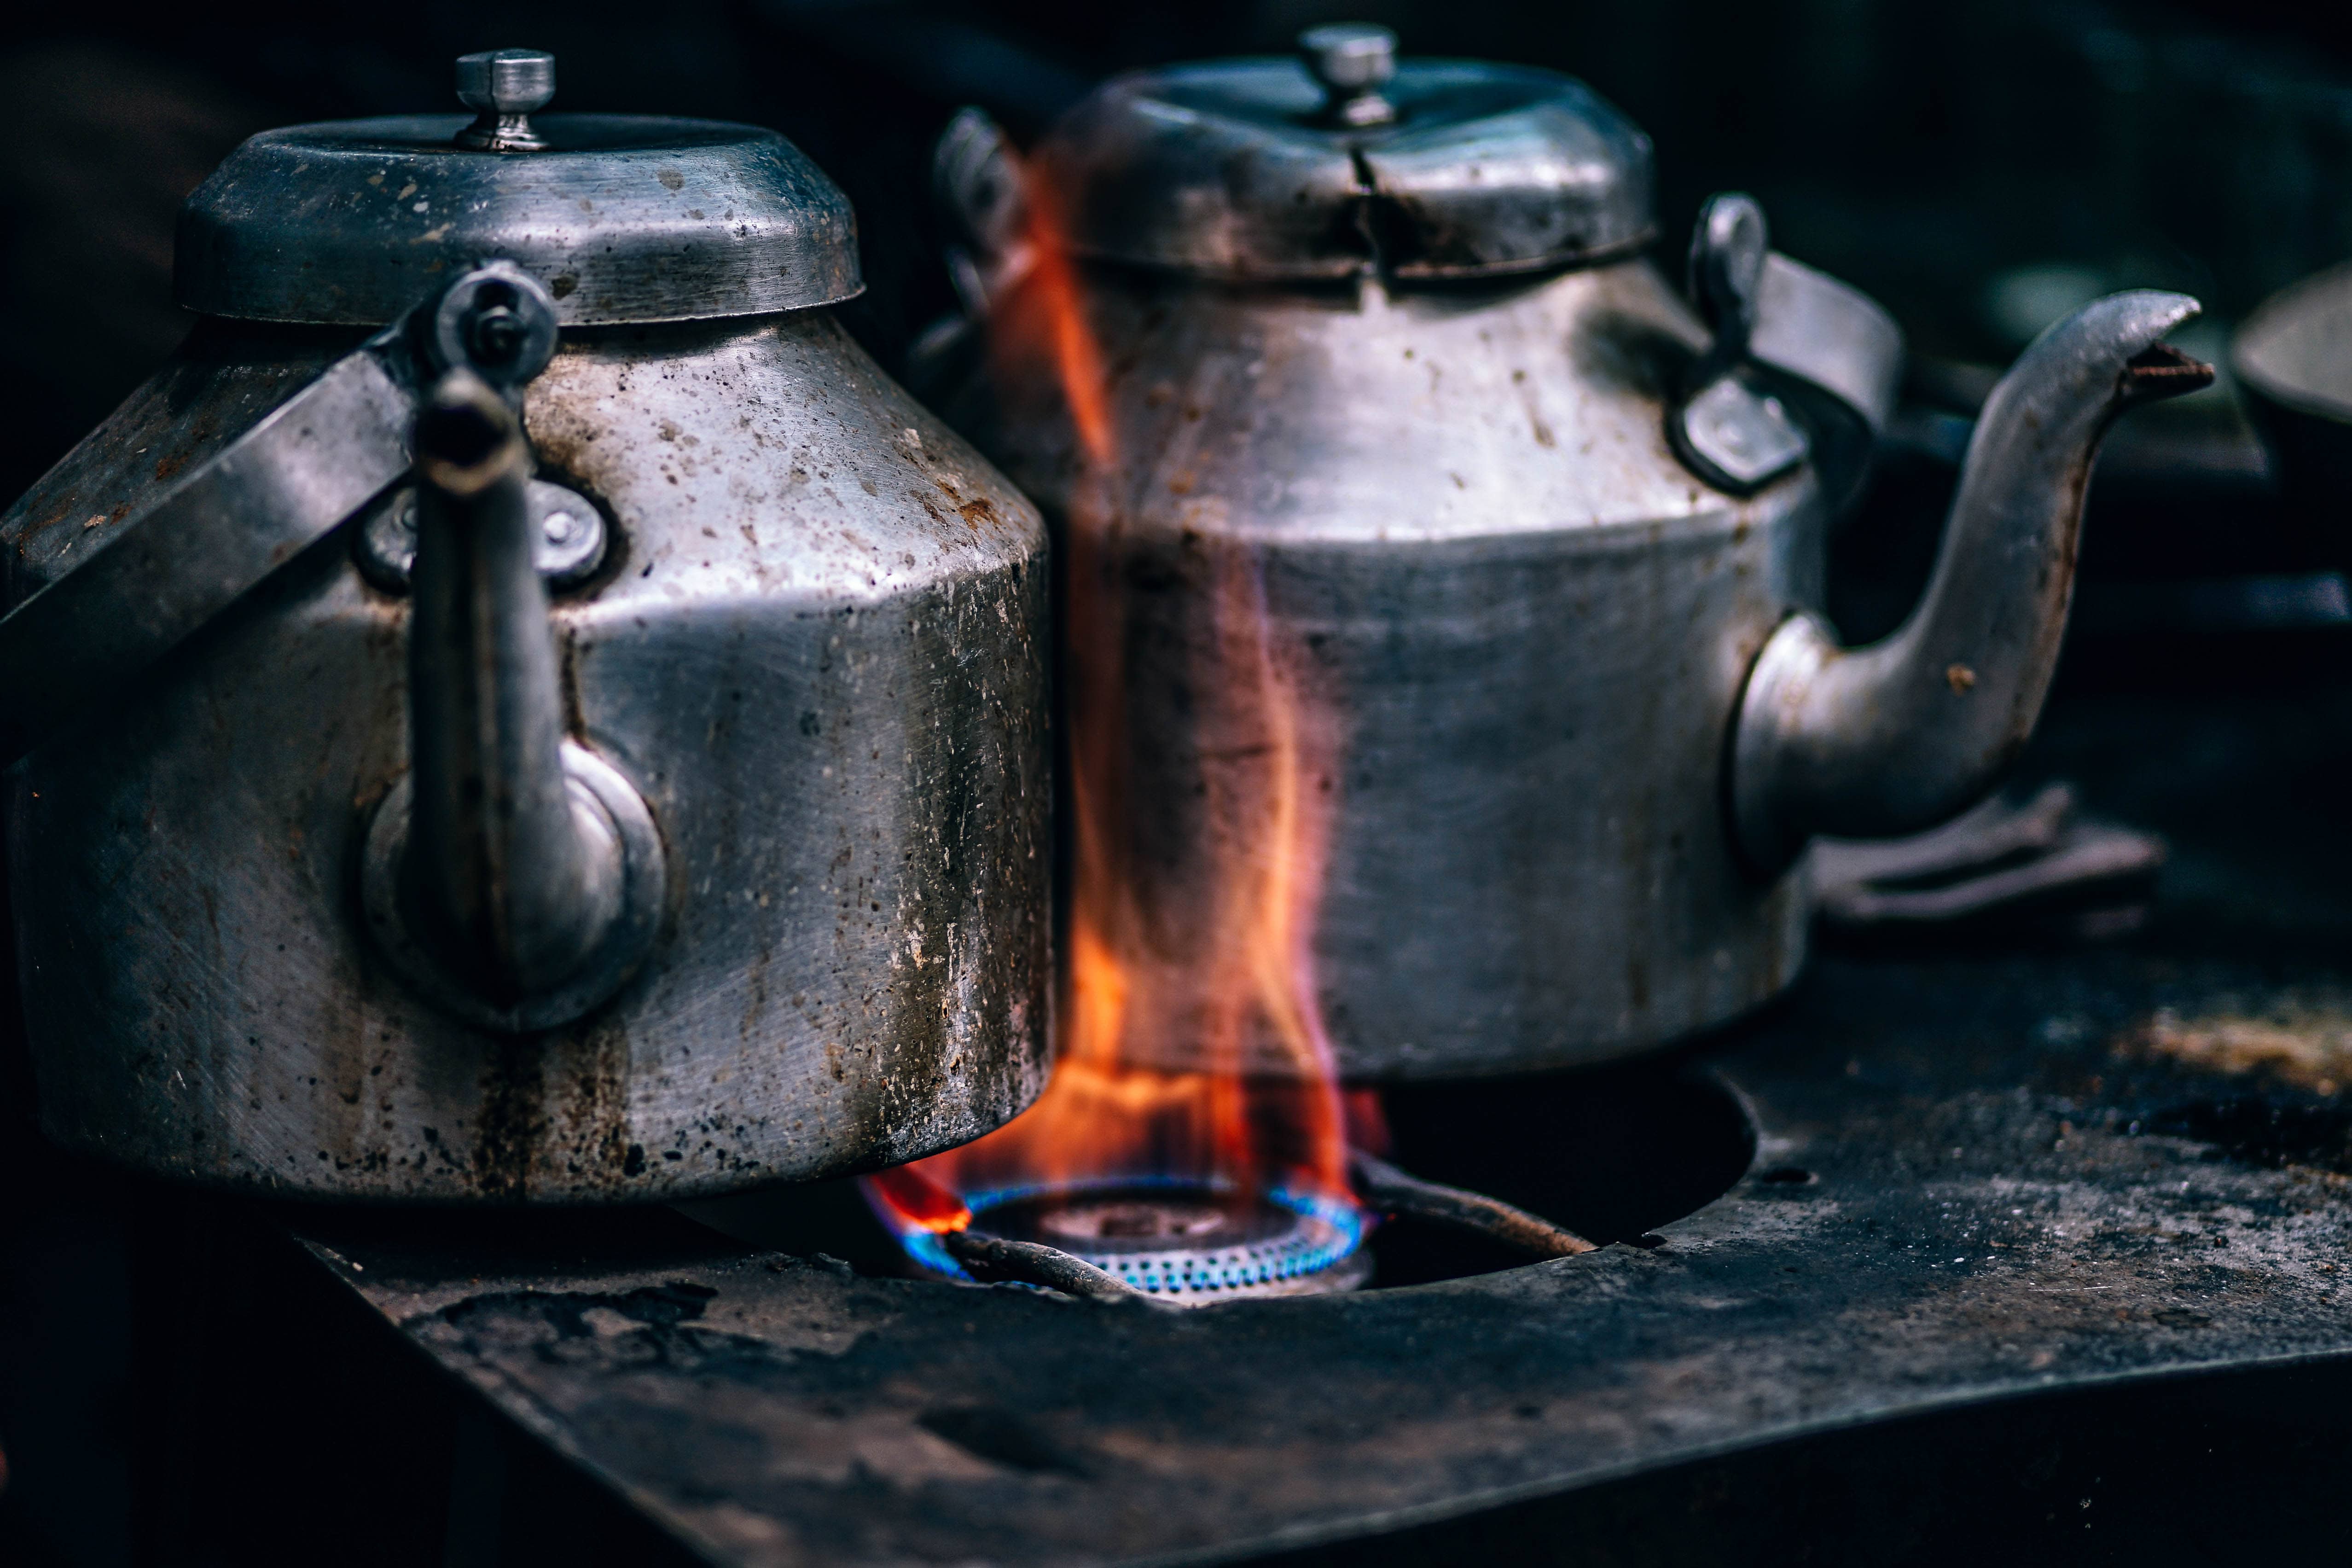 How To Make Chai The Traditional Way